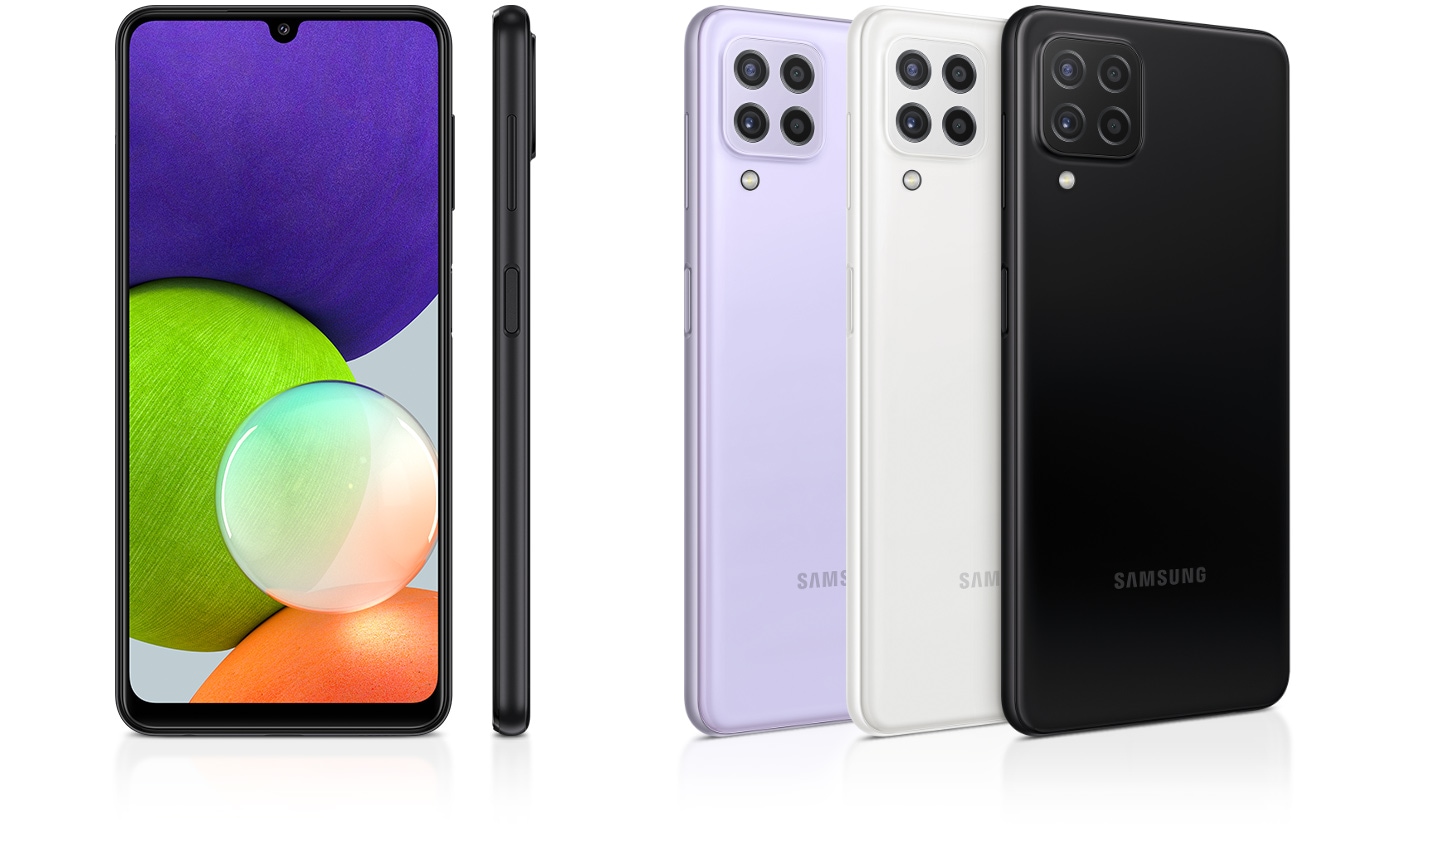 There is a glossy back view of 4 smartphones in black, white, mint, and violet, along with a profile and front view highlighting the premium gloss finish.